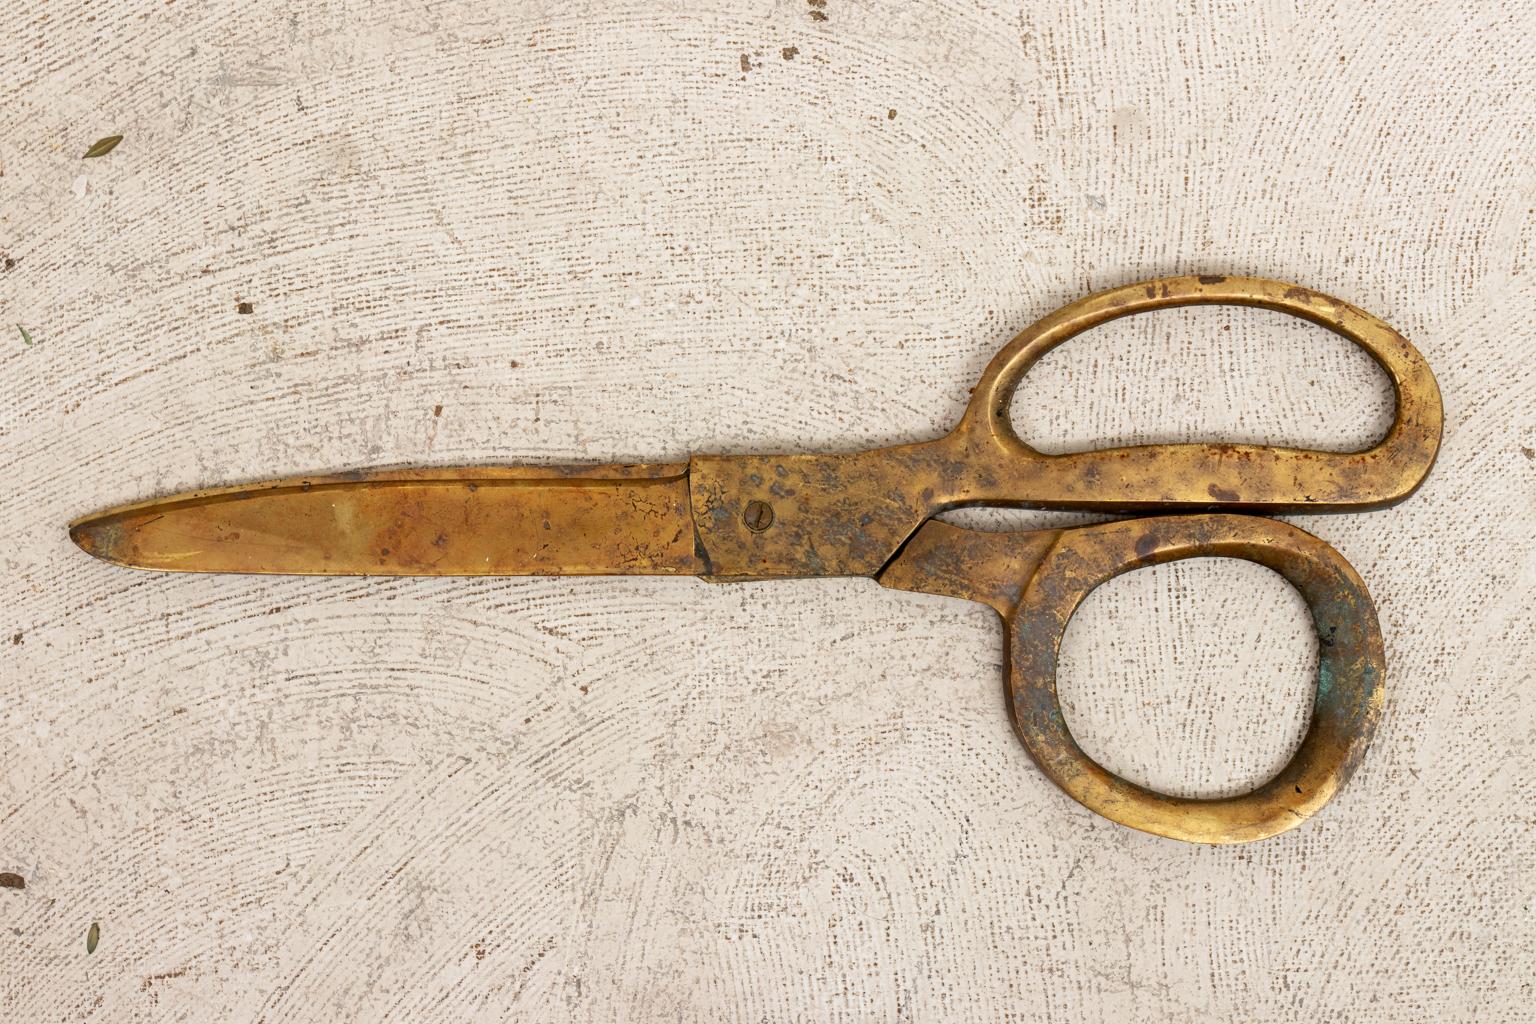 Circa late 19th to early 20th century Tailor's brass trade sign in the shape of scissors. The piece measures 26.00 inches long. Made in the United States. Please note of wear consistent with age including patina and oxidation.